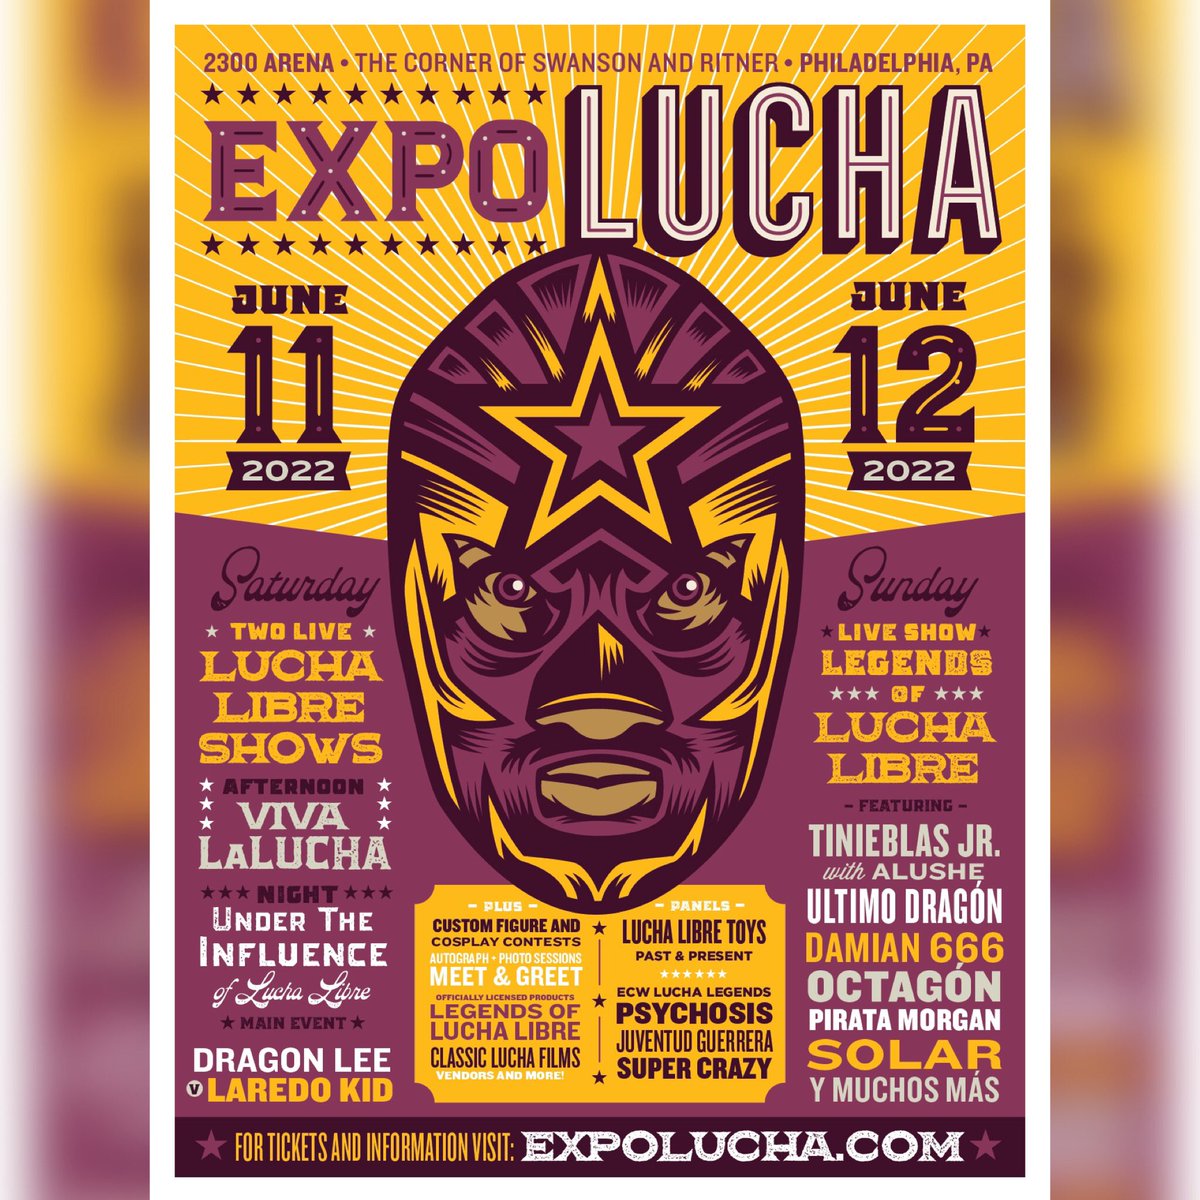 #ExpoLucha @ExpoLucha: Philadelphia. Expo Lucha is the largest lucha libre convention in the world, and the only one of its kind outside of Mexico! 🇺🇸 Buy your tickets here expolucha.com/tickets 🎟 #LuchaCentral #LuchaLibre #ProWrestling #プロレス 🤼‍♂️